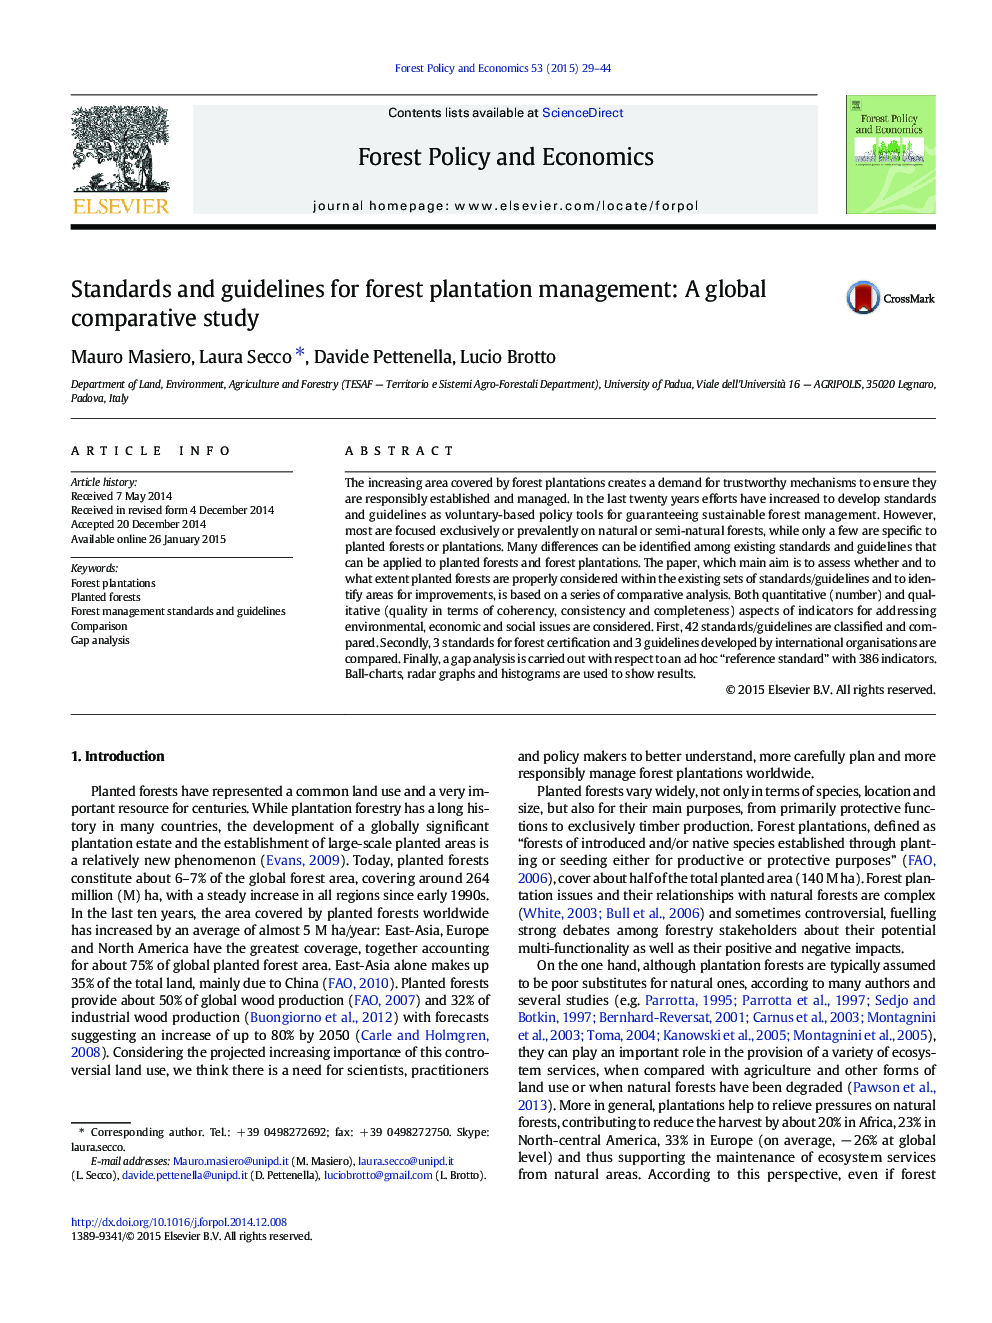 Standards and guidelines for forest plantation management: A global comparative study